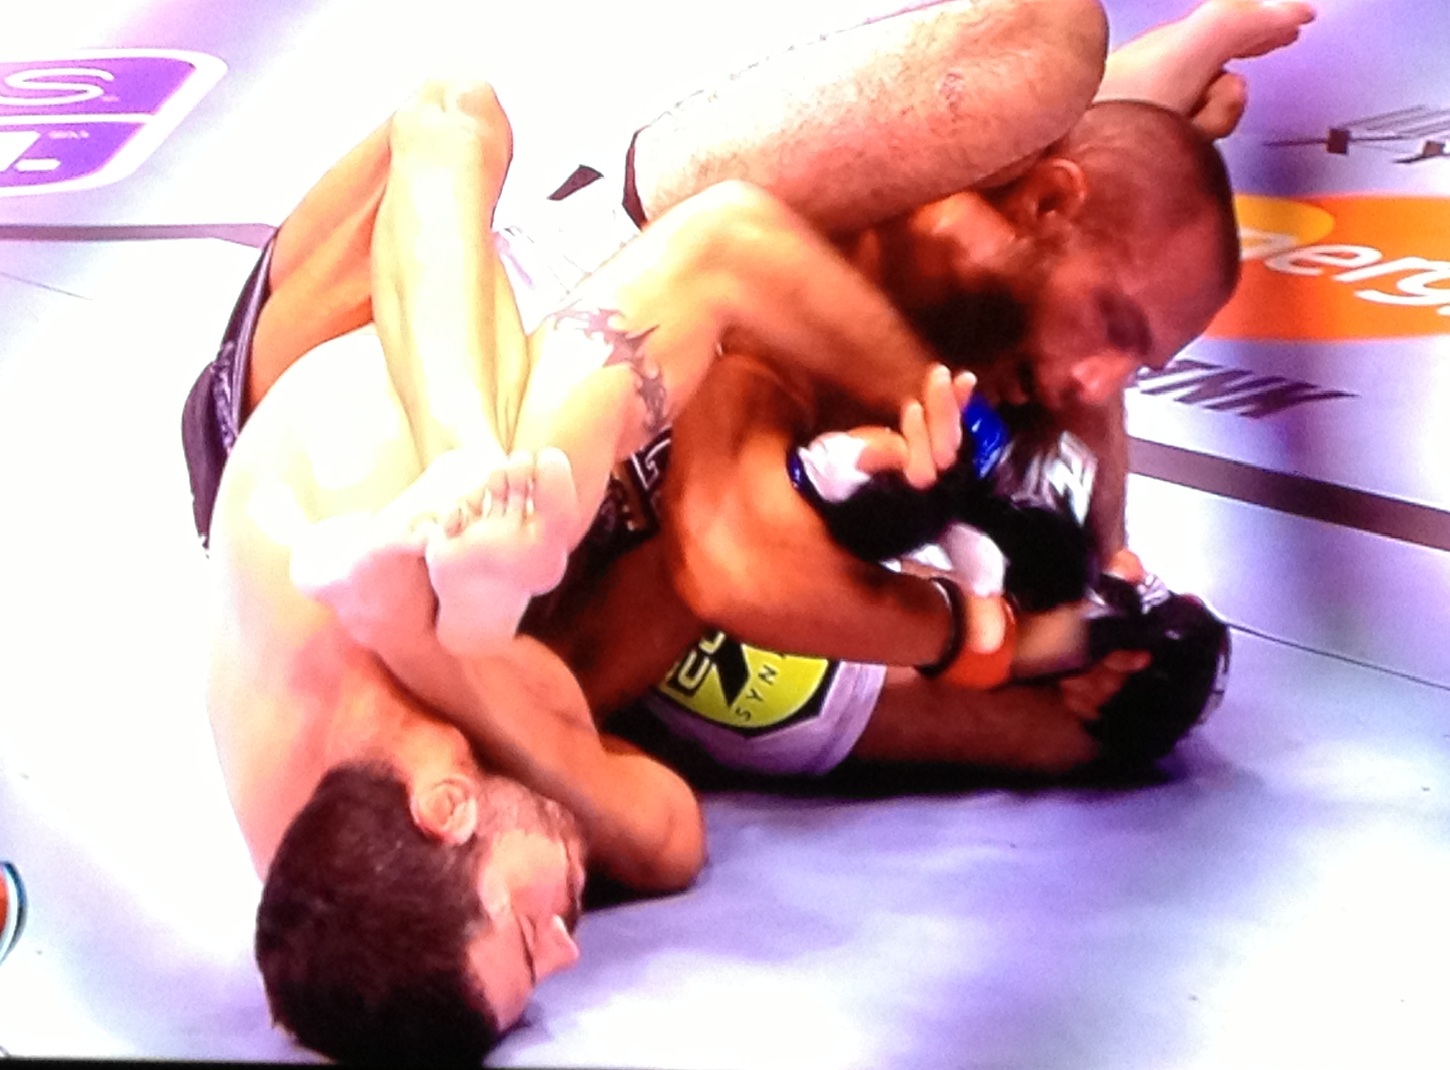 UFC match delayed due to limb entanglement